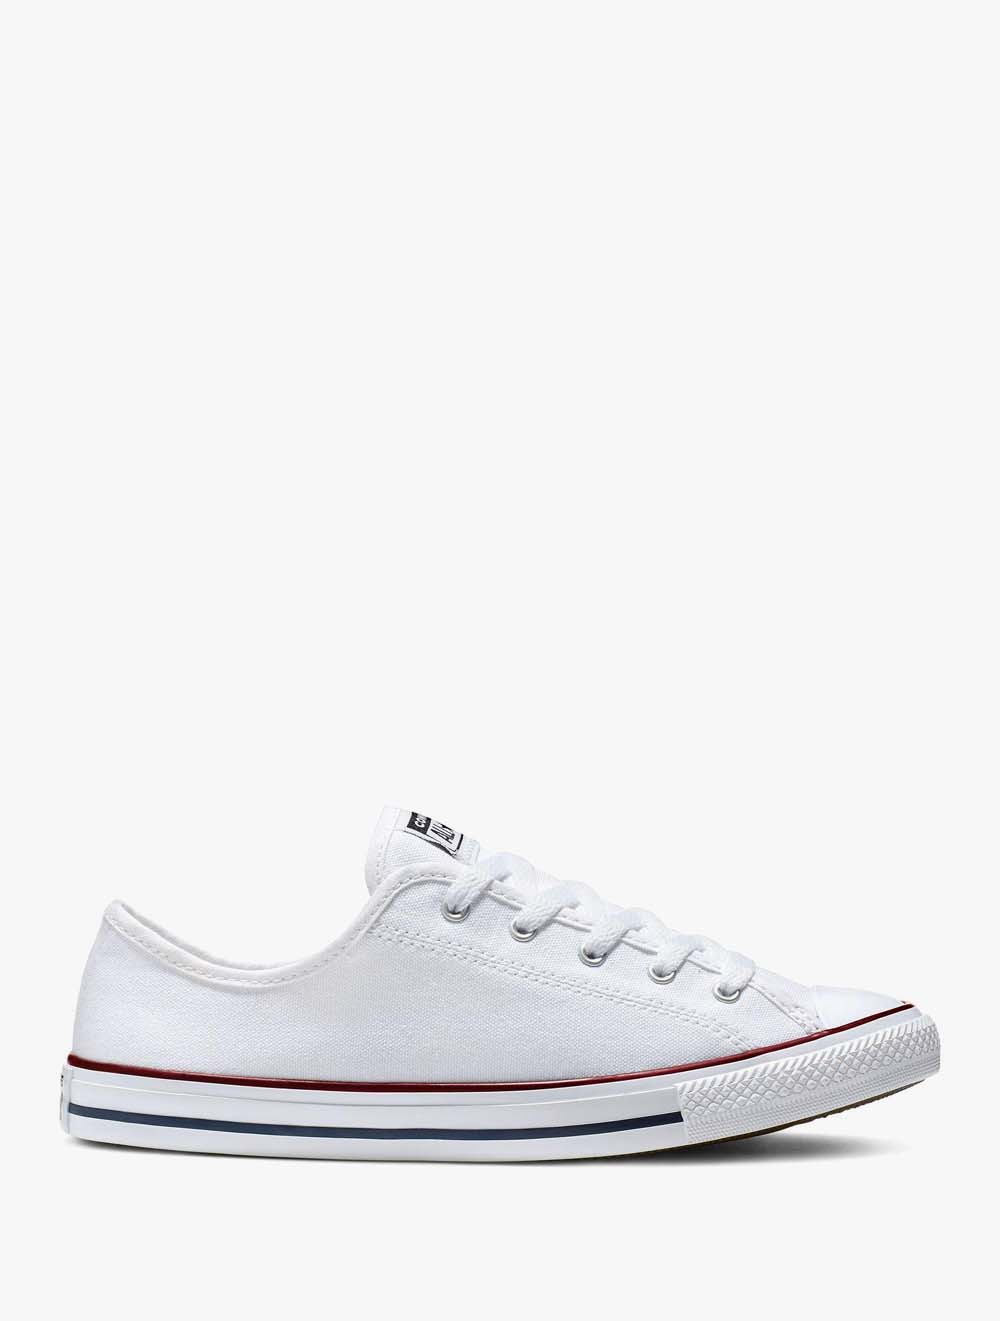 Shop Shoes \u0026 Accessories From Converse in Indonesia on Mapemall.com